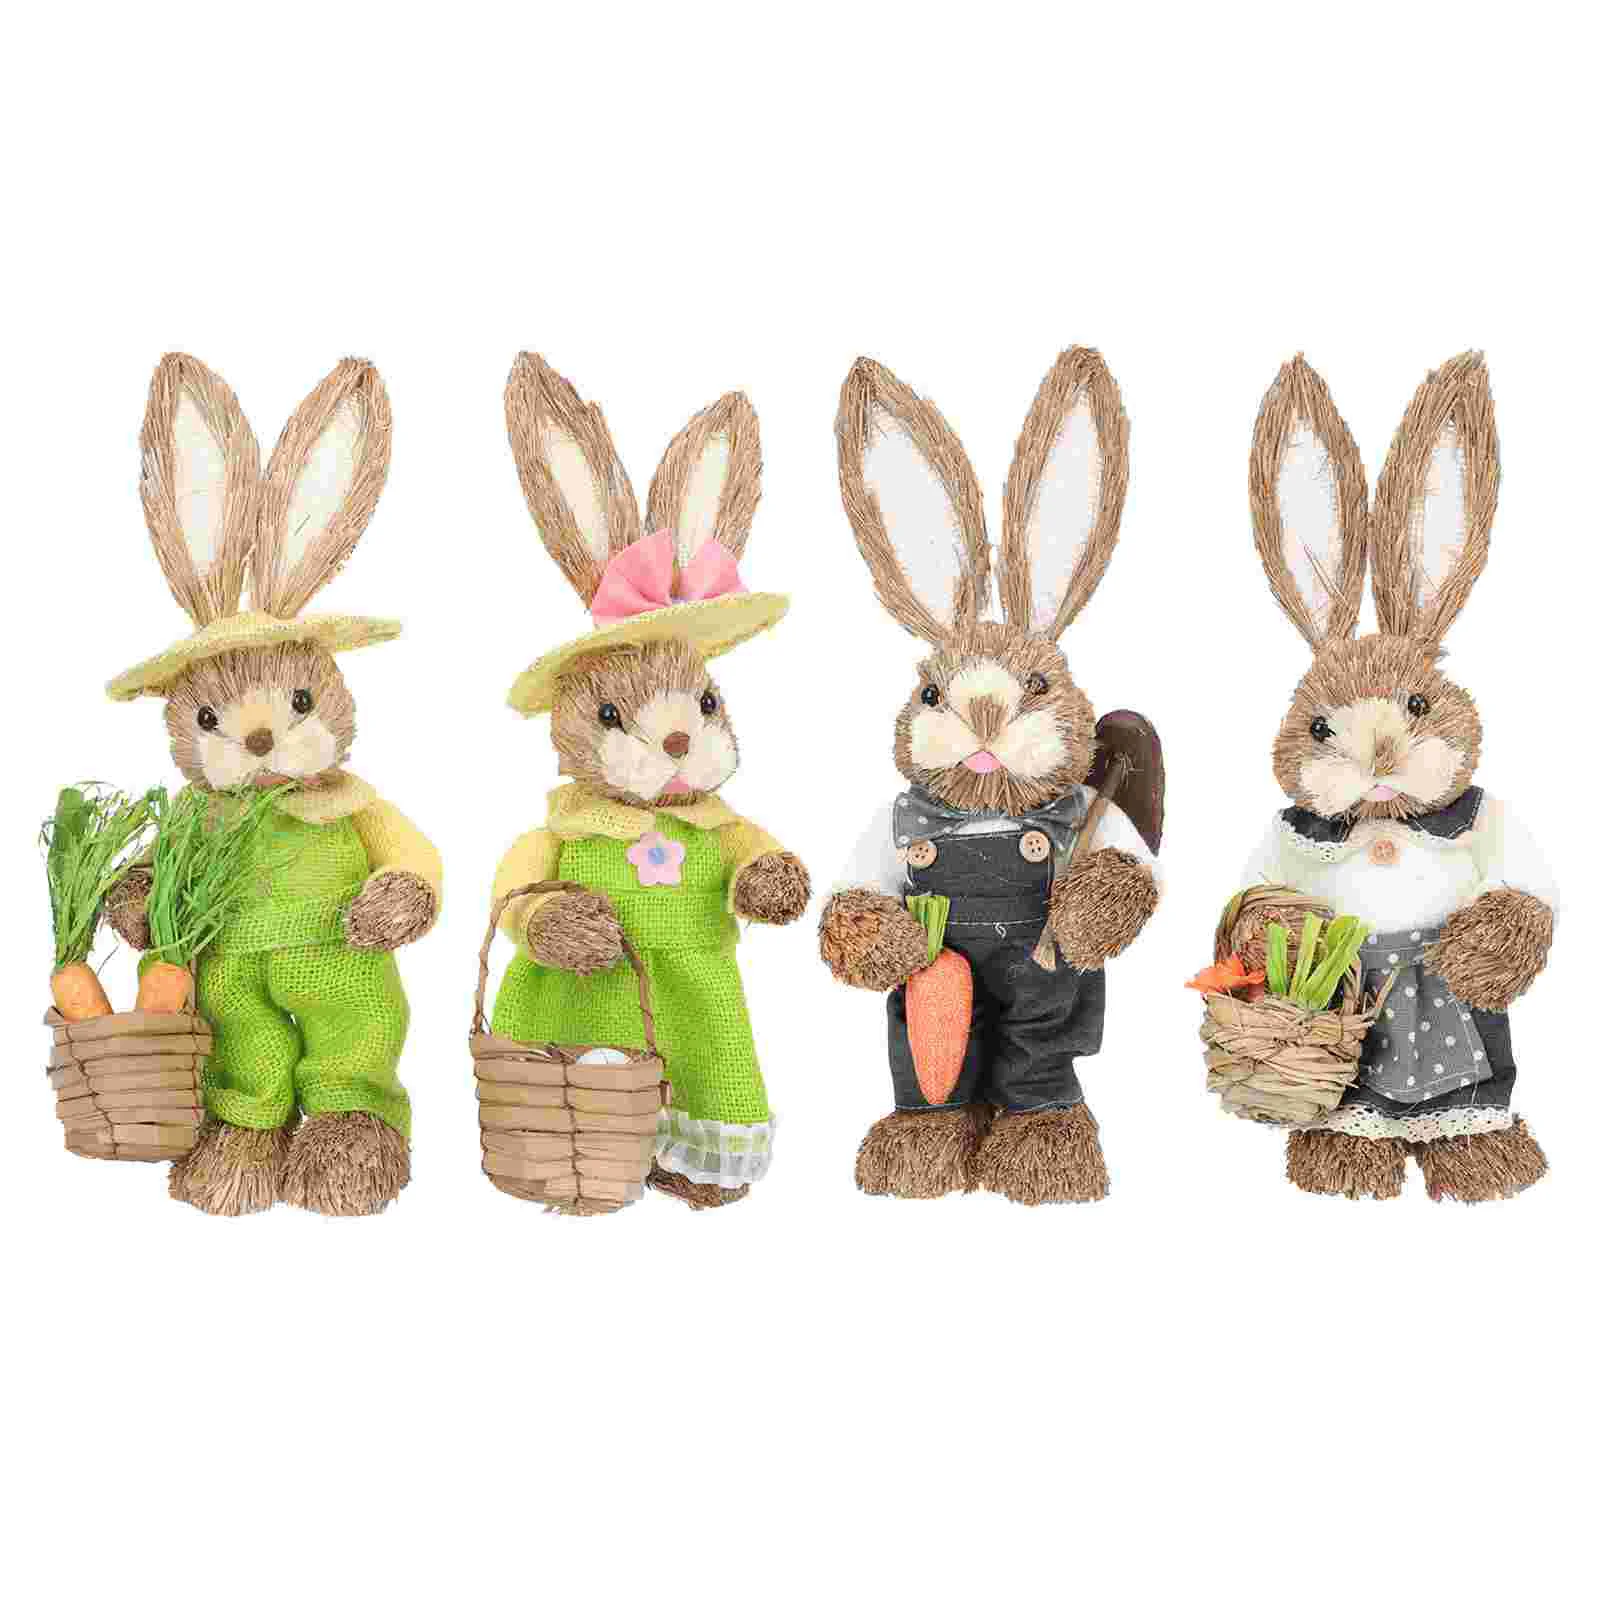 

Bunny Easter Rabbit Figurine Decor Straw Woven Statue Figurines Decorations Statues Ornament Garden Standing Decoration Spring